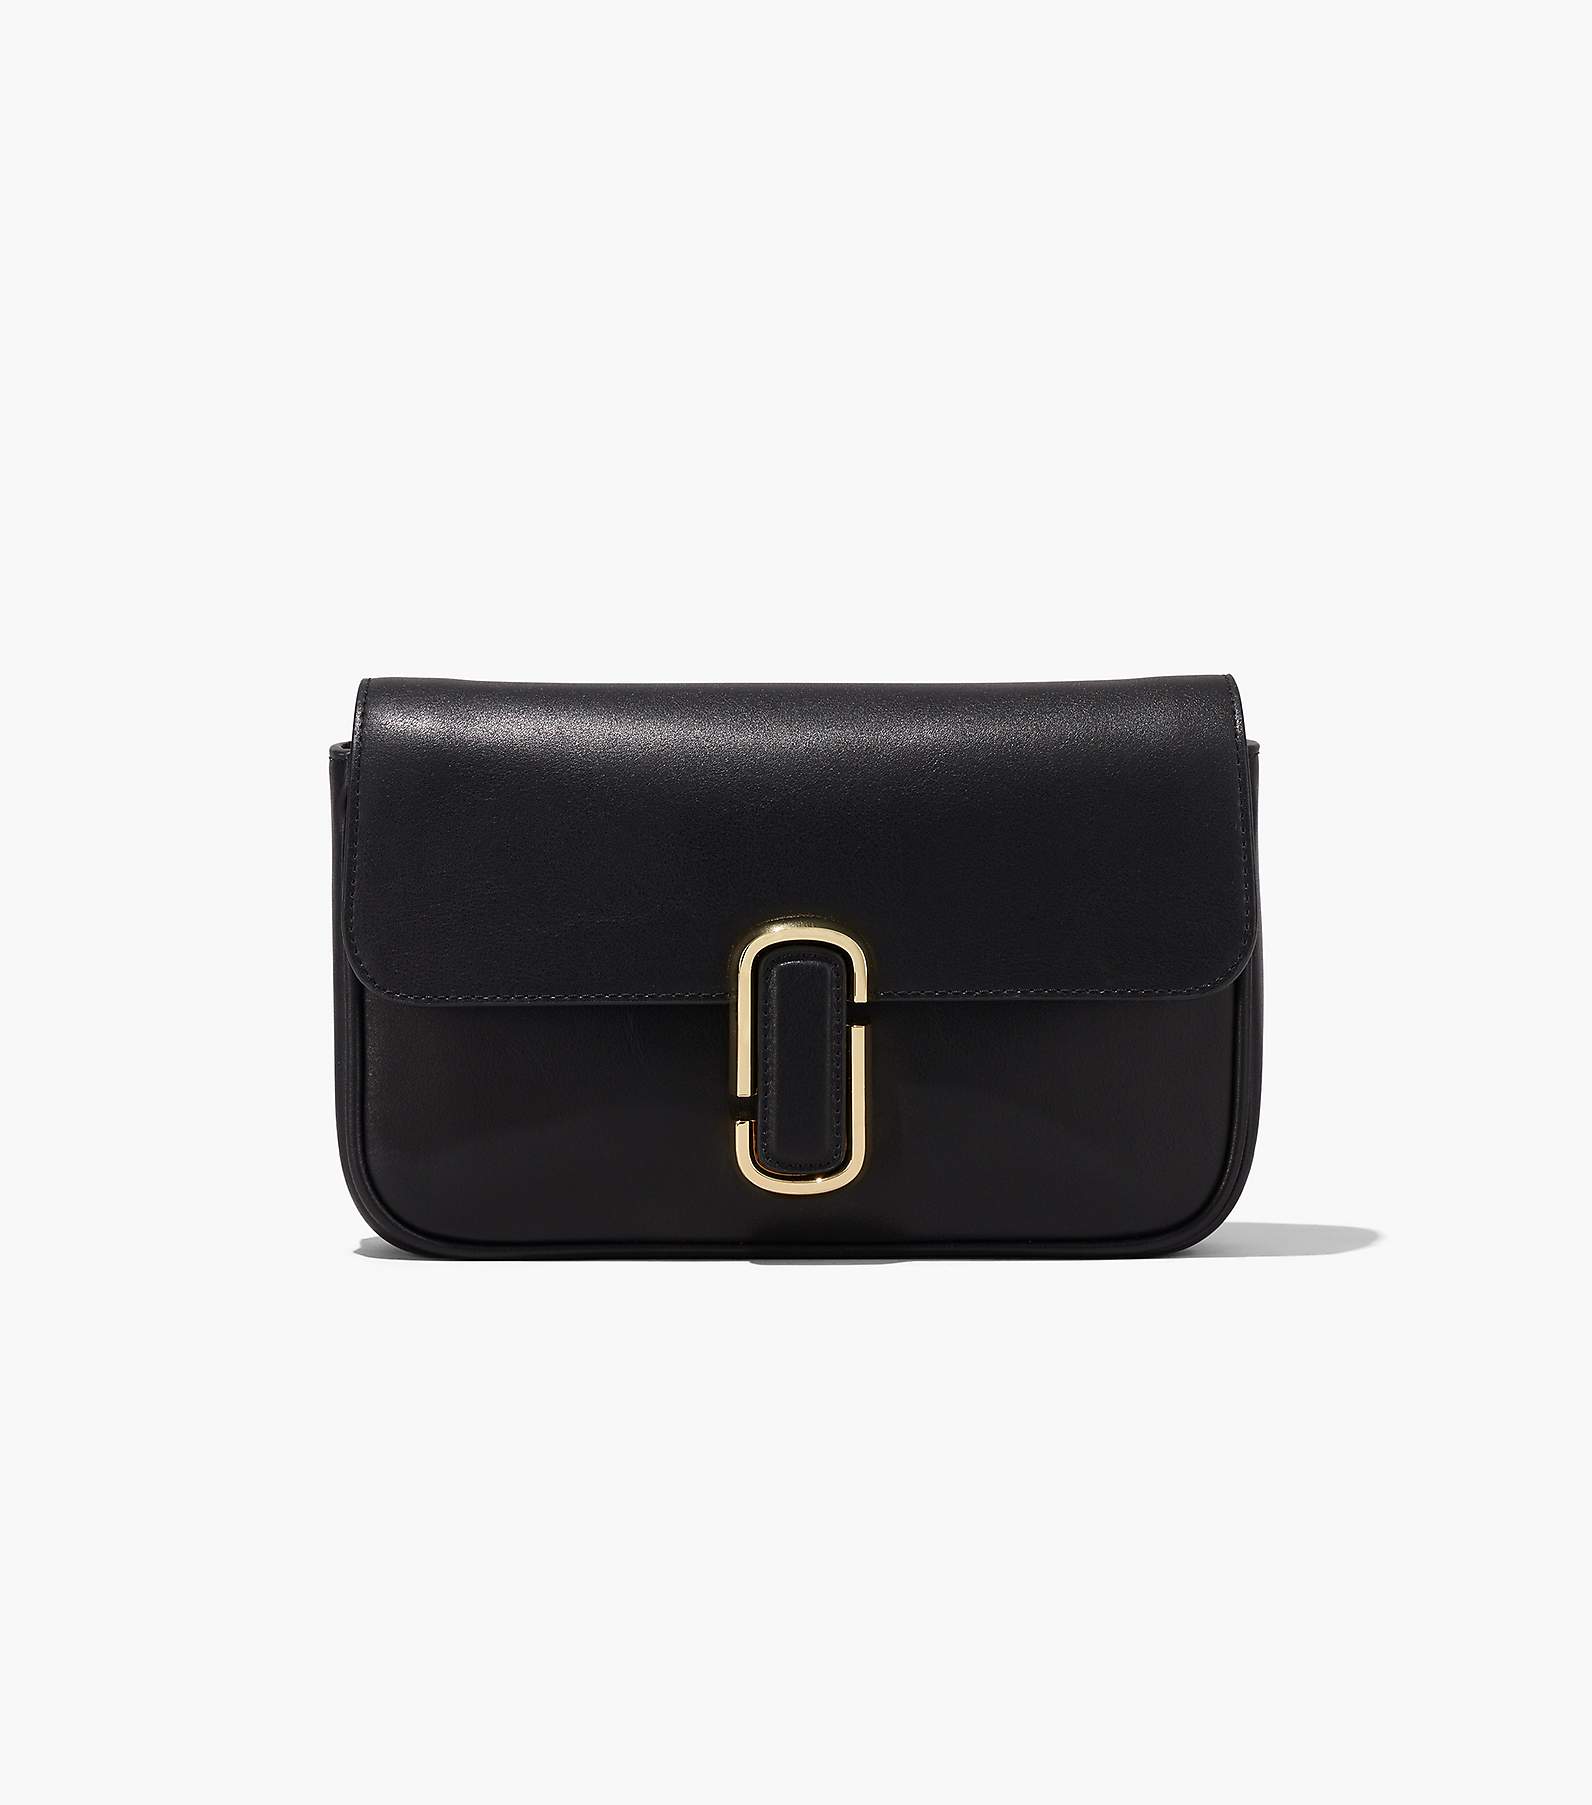 MARC JACOBS: The J Link bag in canvas and leather - Brown